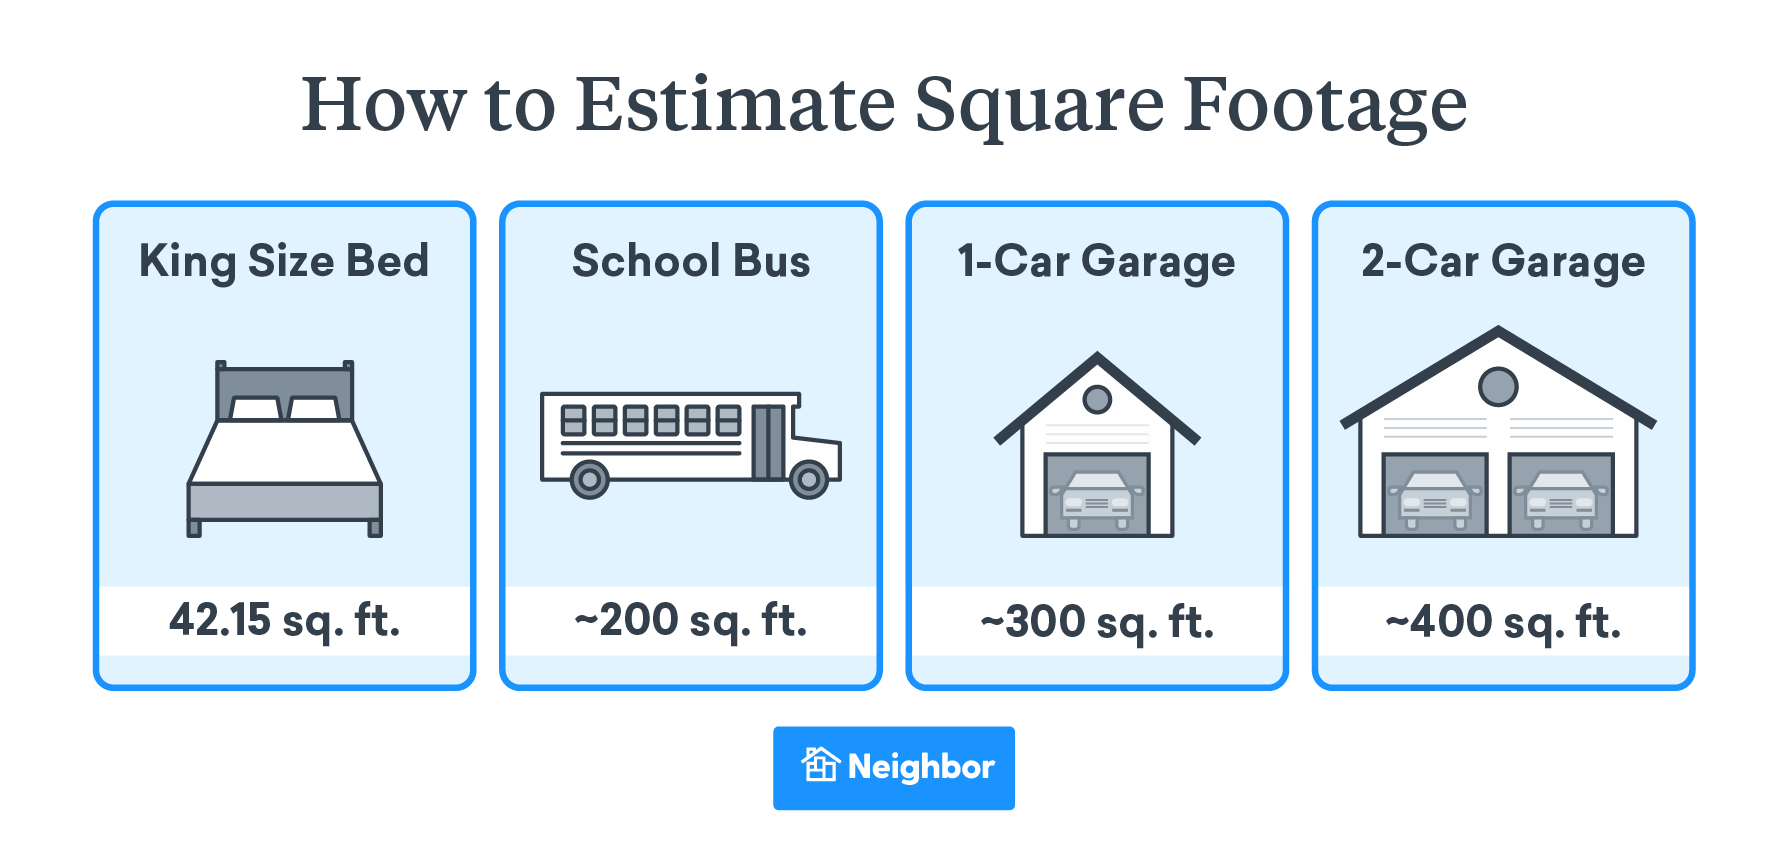 Living Room 320 Square Footage Calculator